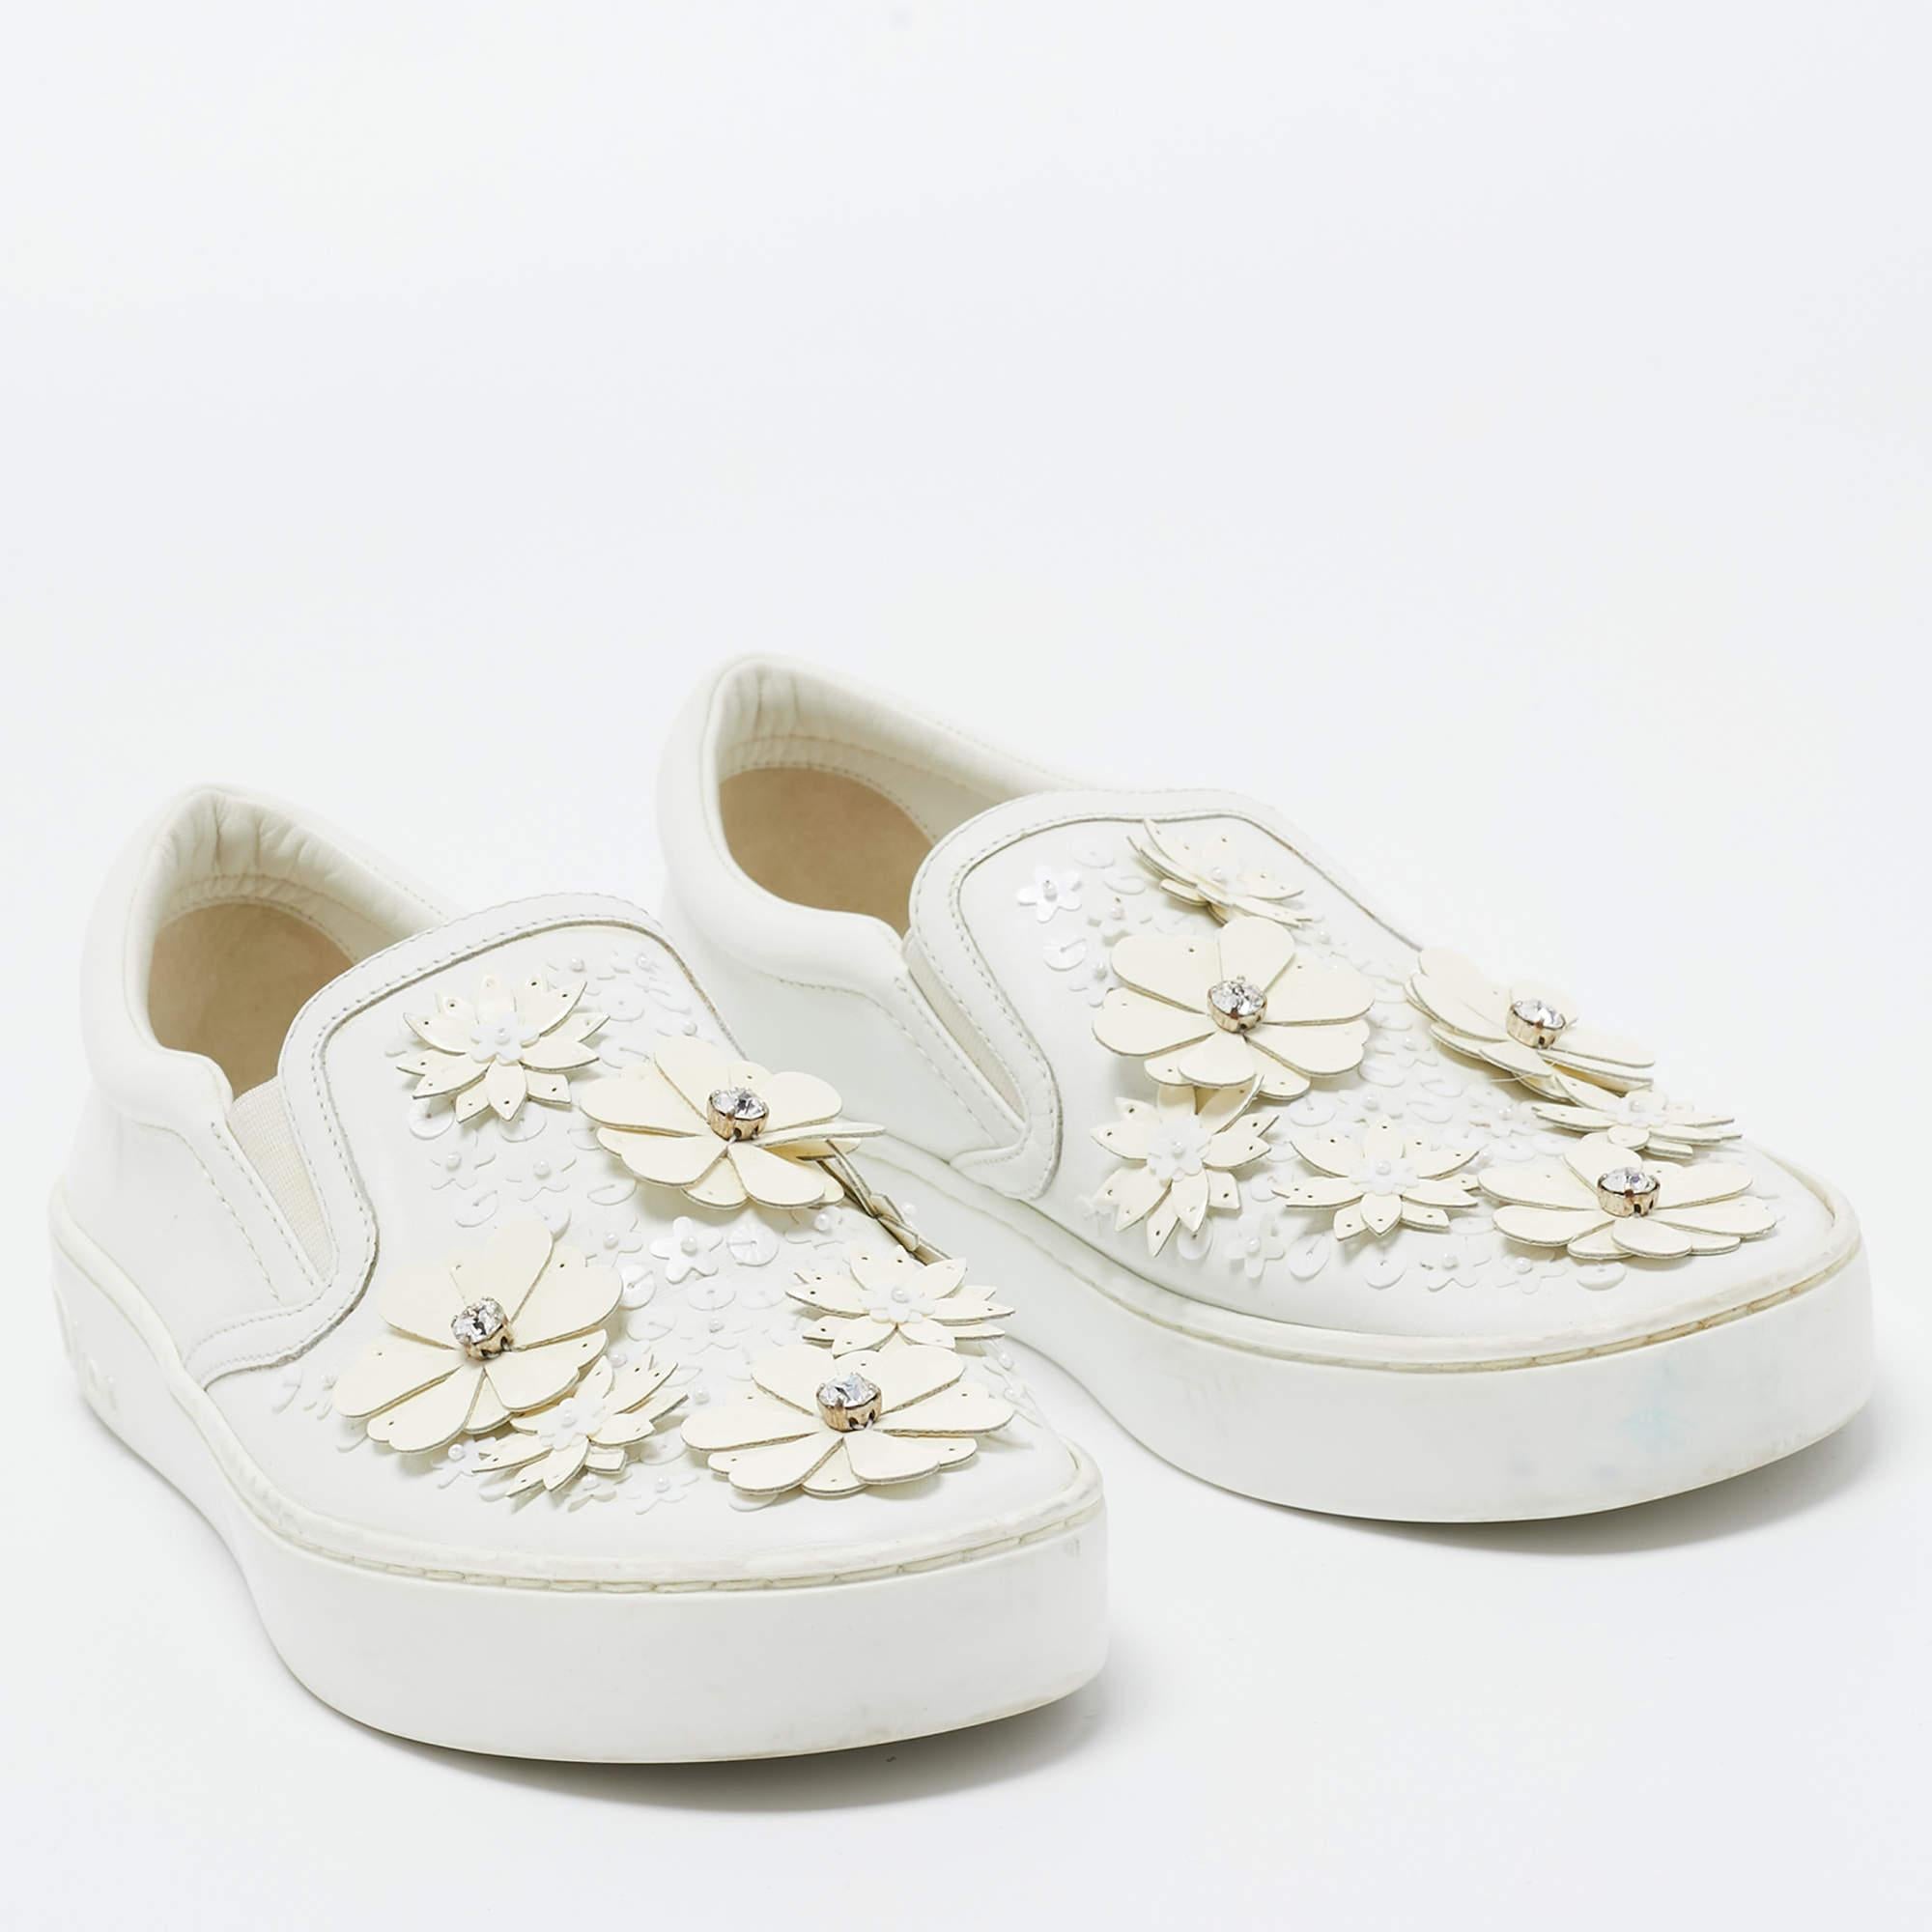 Dior White Leather Daisy Flower Embellished Slip On Sneakers Size 37.5 1